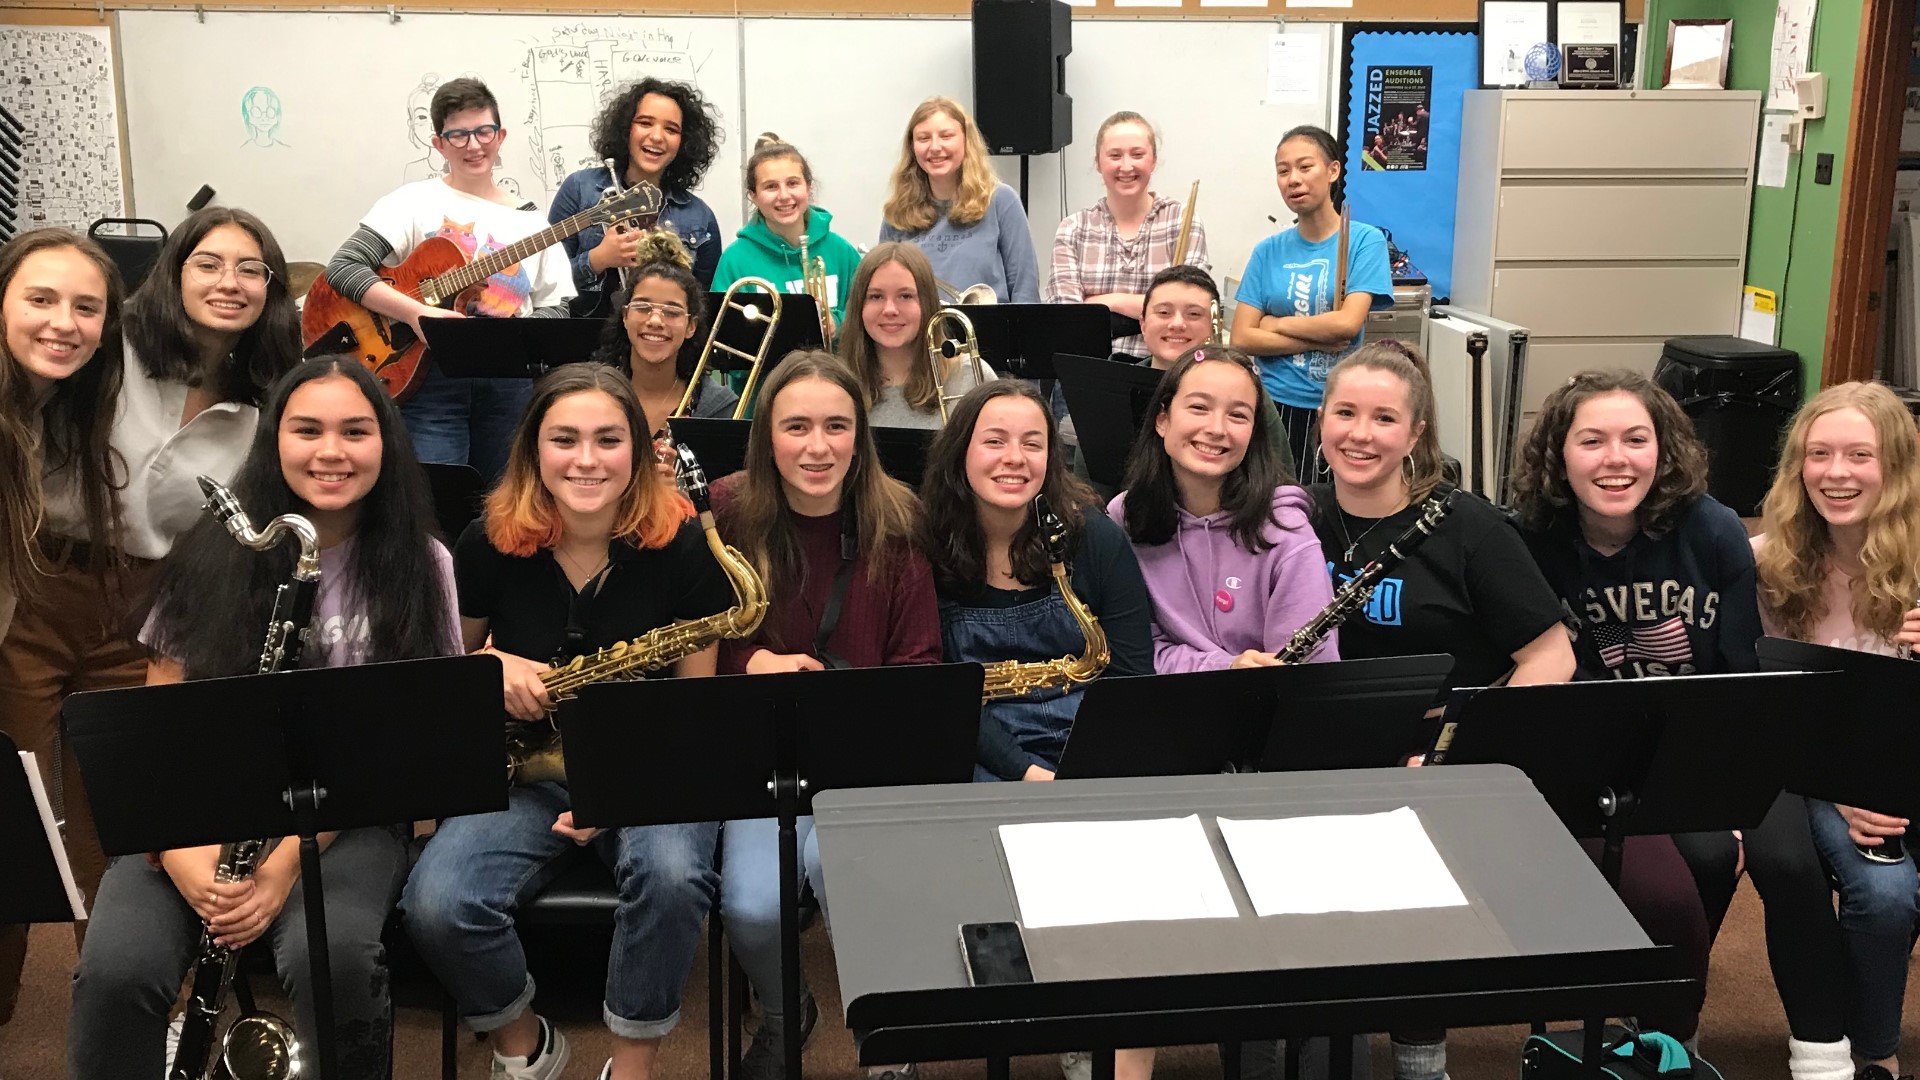 Big band made up of Western Washington high school girls plays with passion